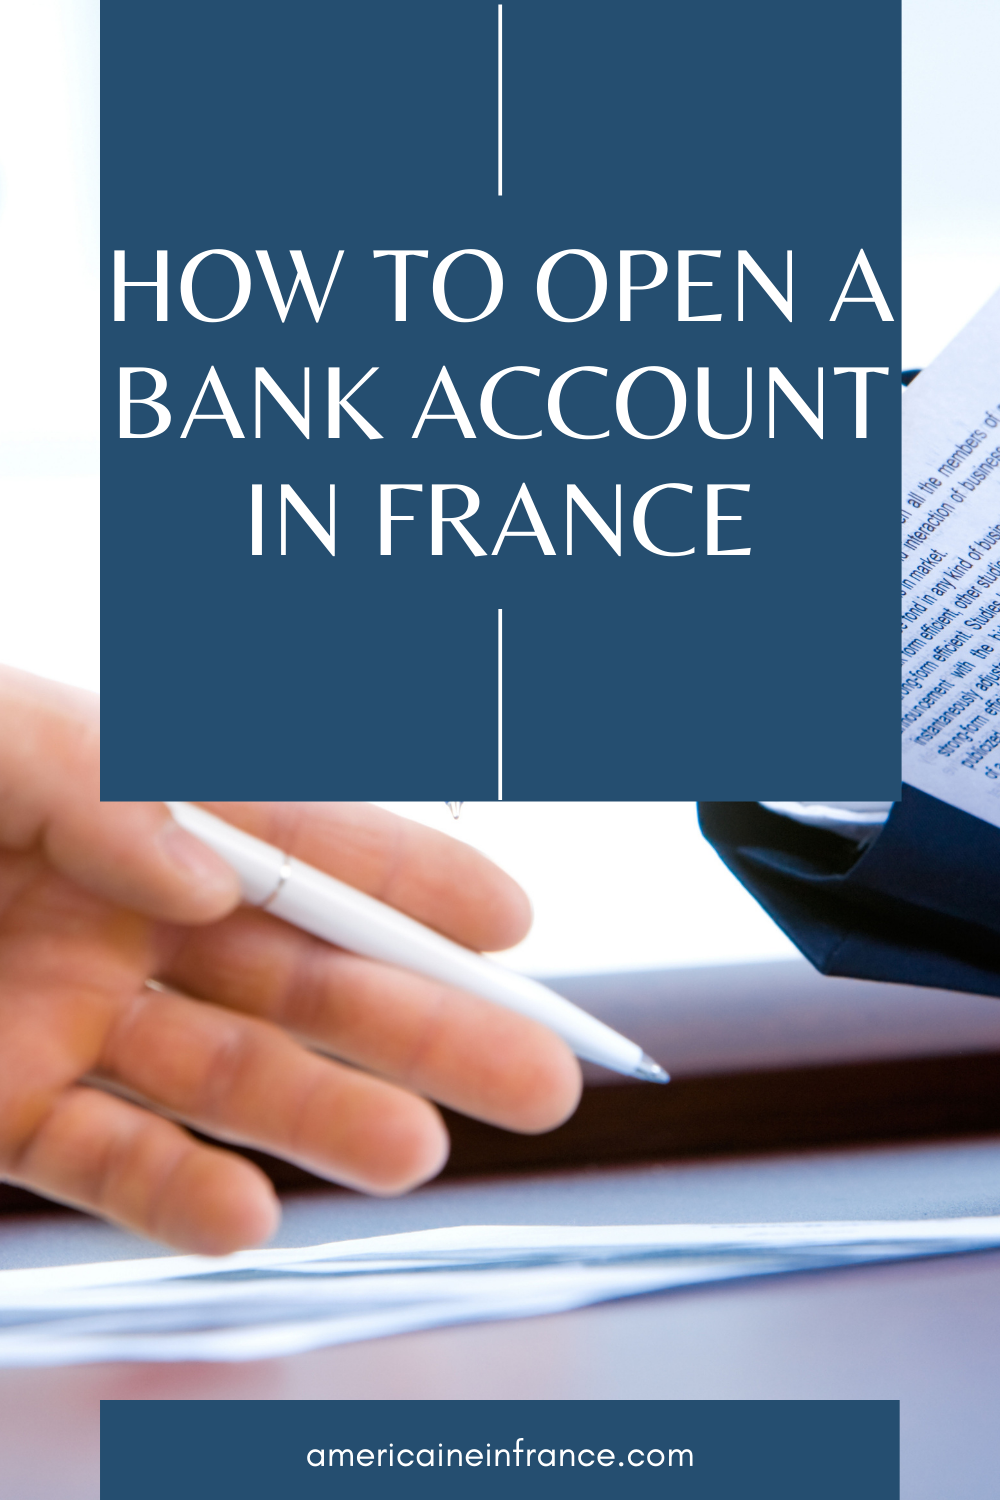 How to Open a Bank Account in France: A Guide for Non-Residents